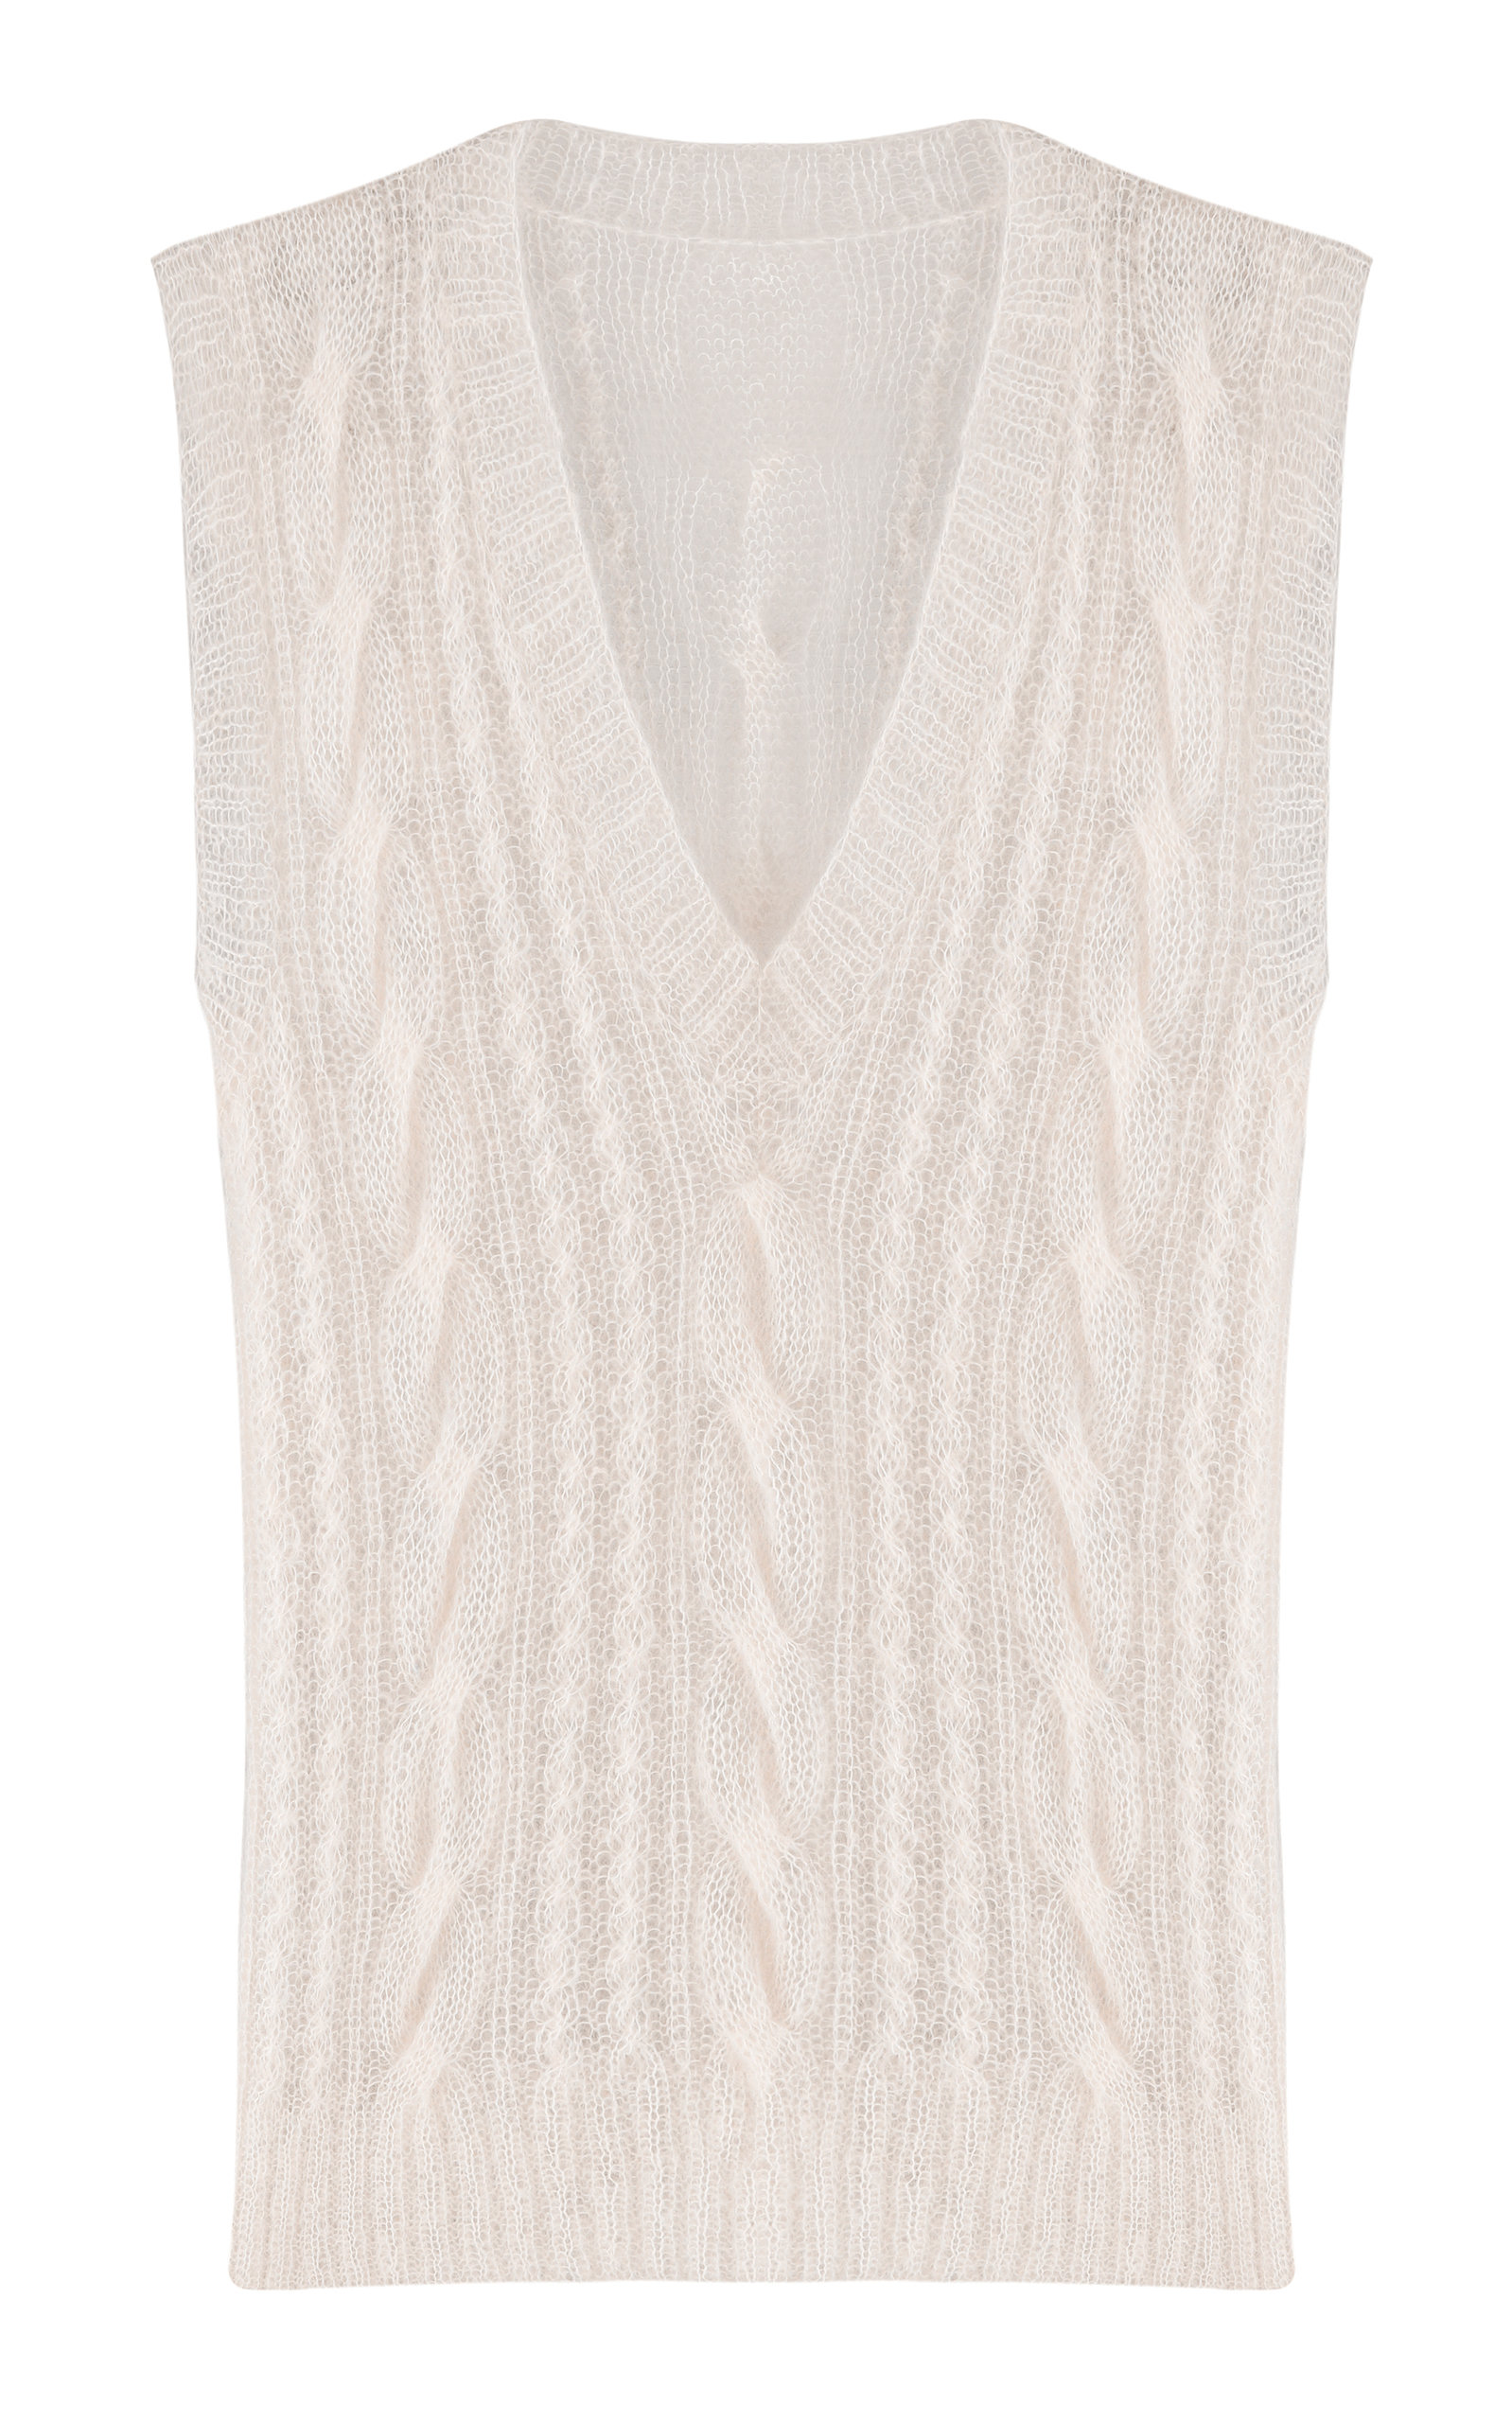 ANNA OCTOBER VIENNE SHEER KNIT TOP